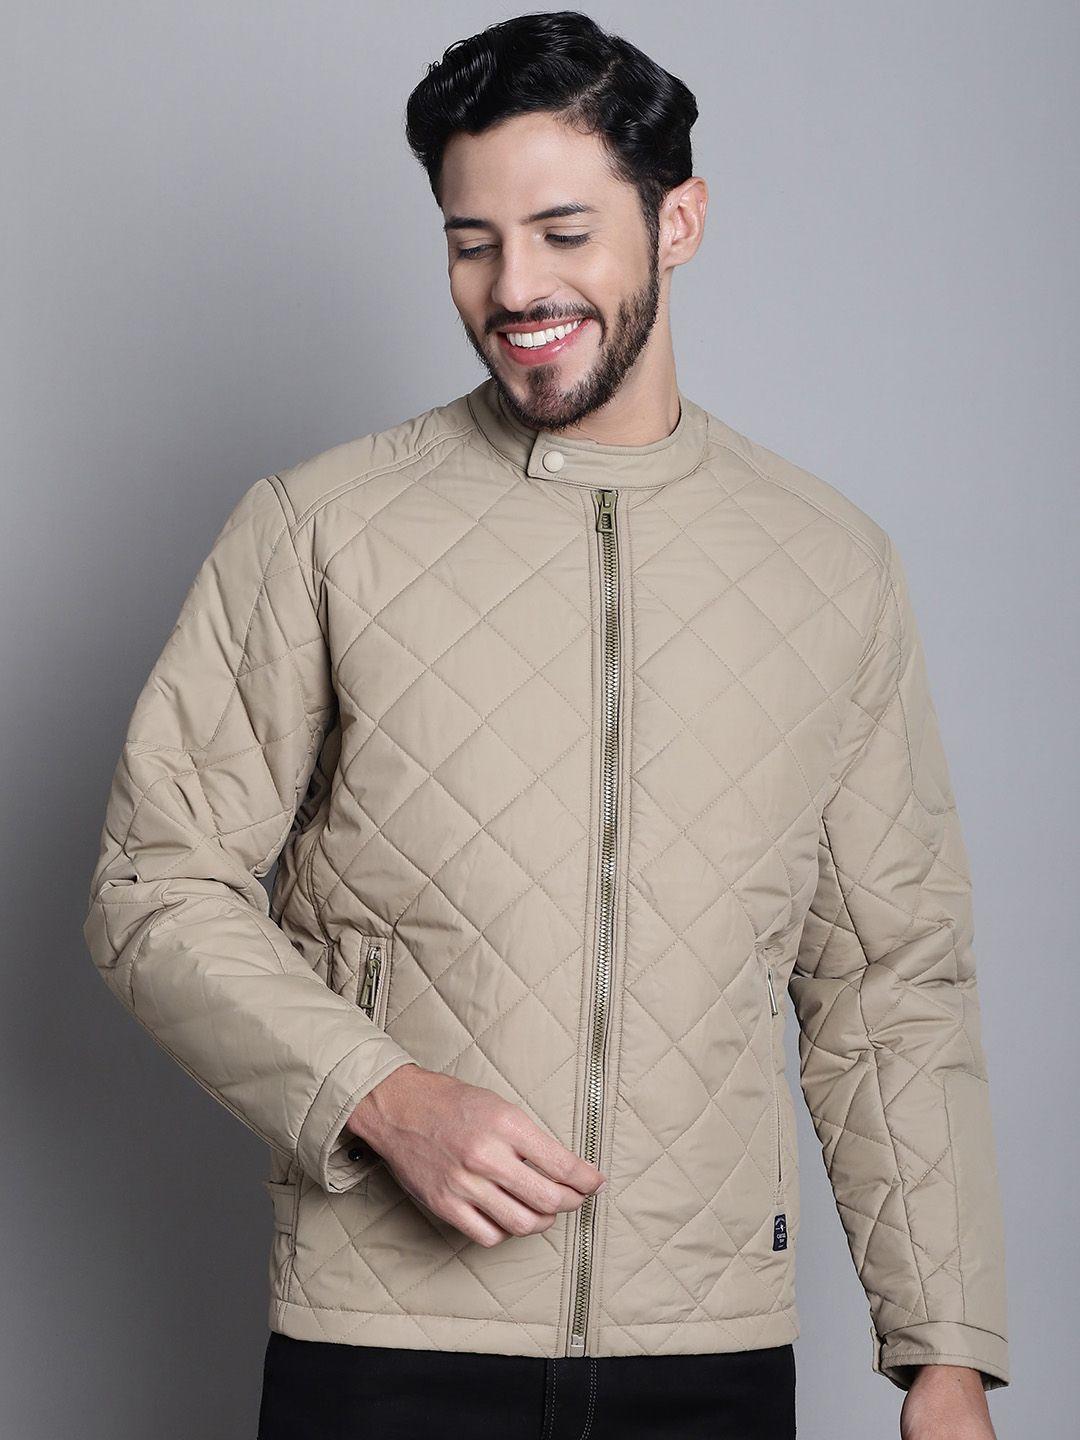 cantabil mock collar lightweight quilted jacket with zip detail